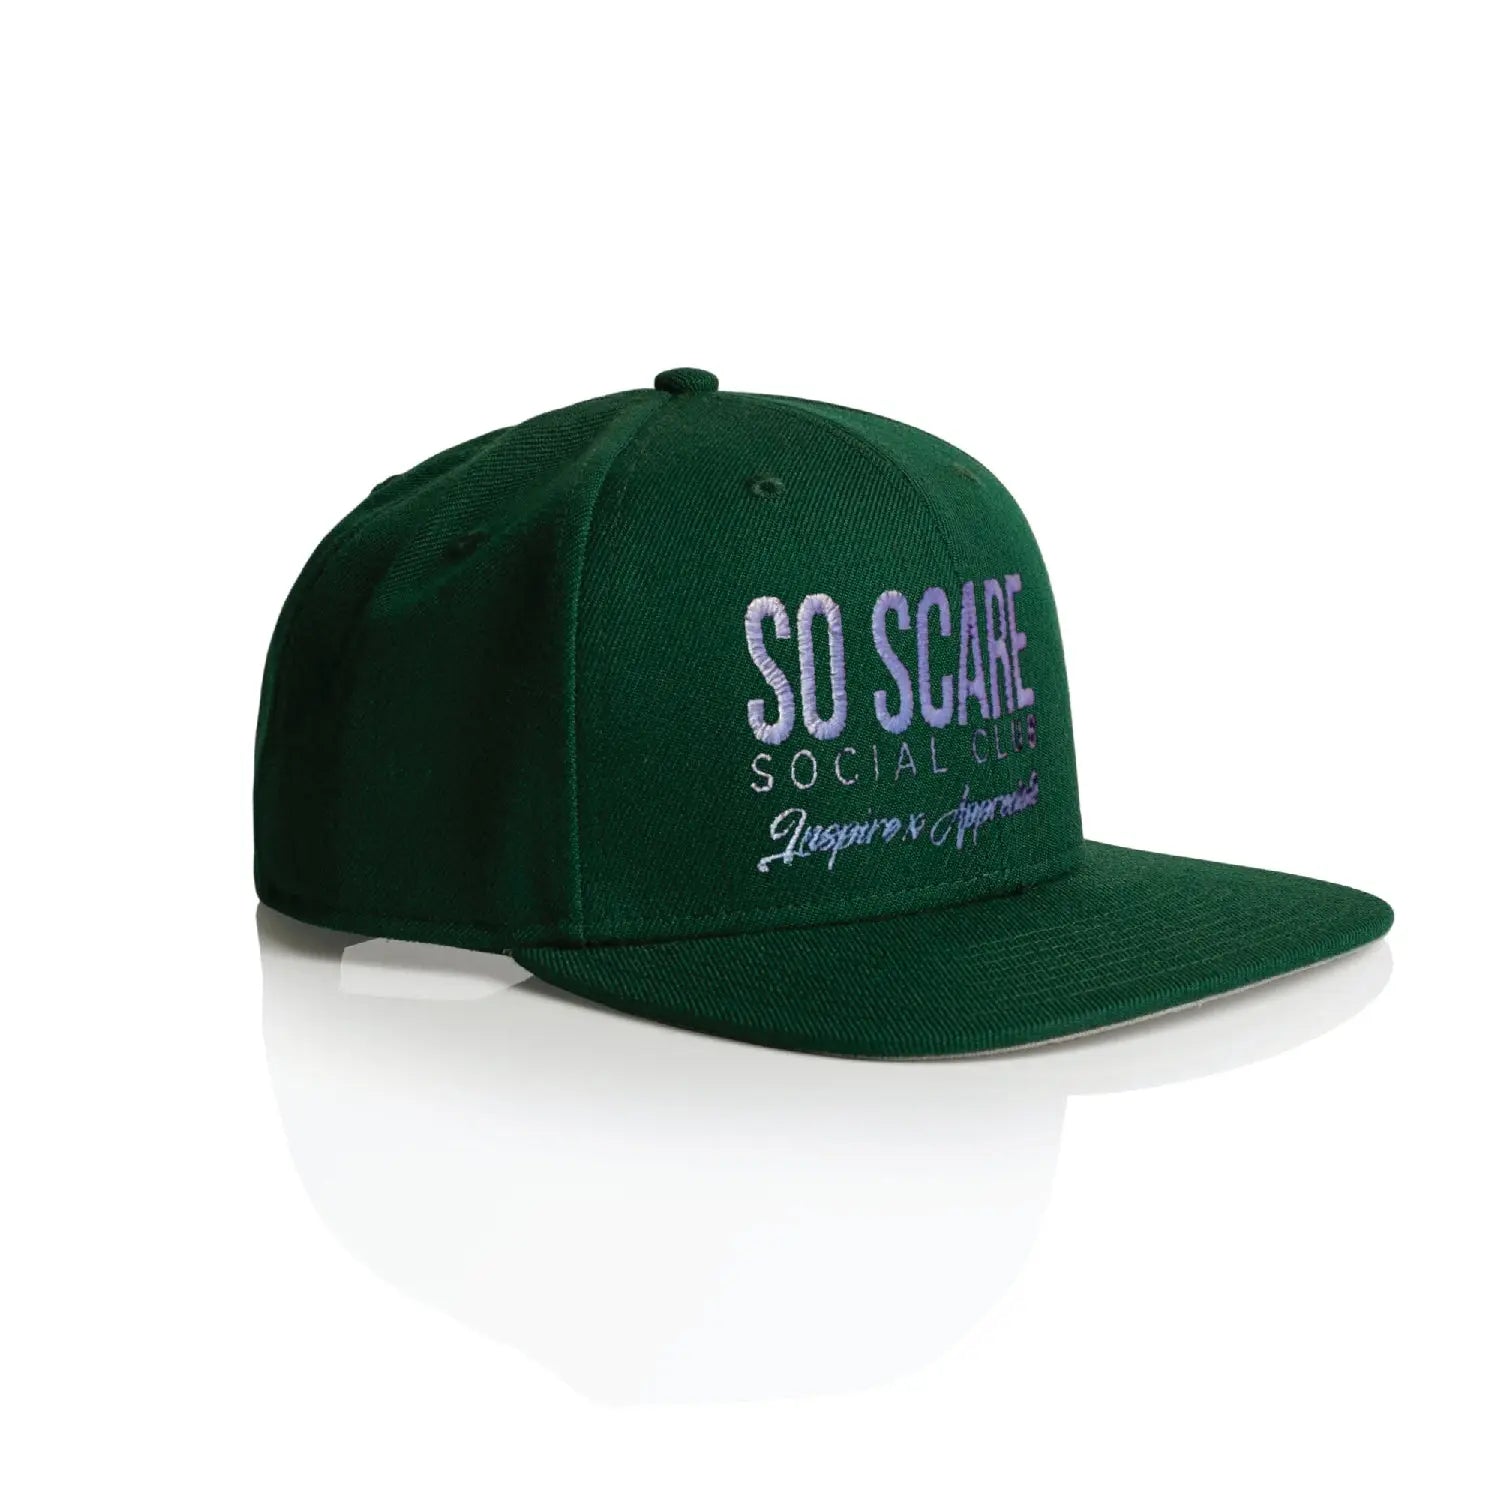 SNAPBACK HAT - FOREST GREEN SO SCARE SOCIAL CLUB